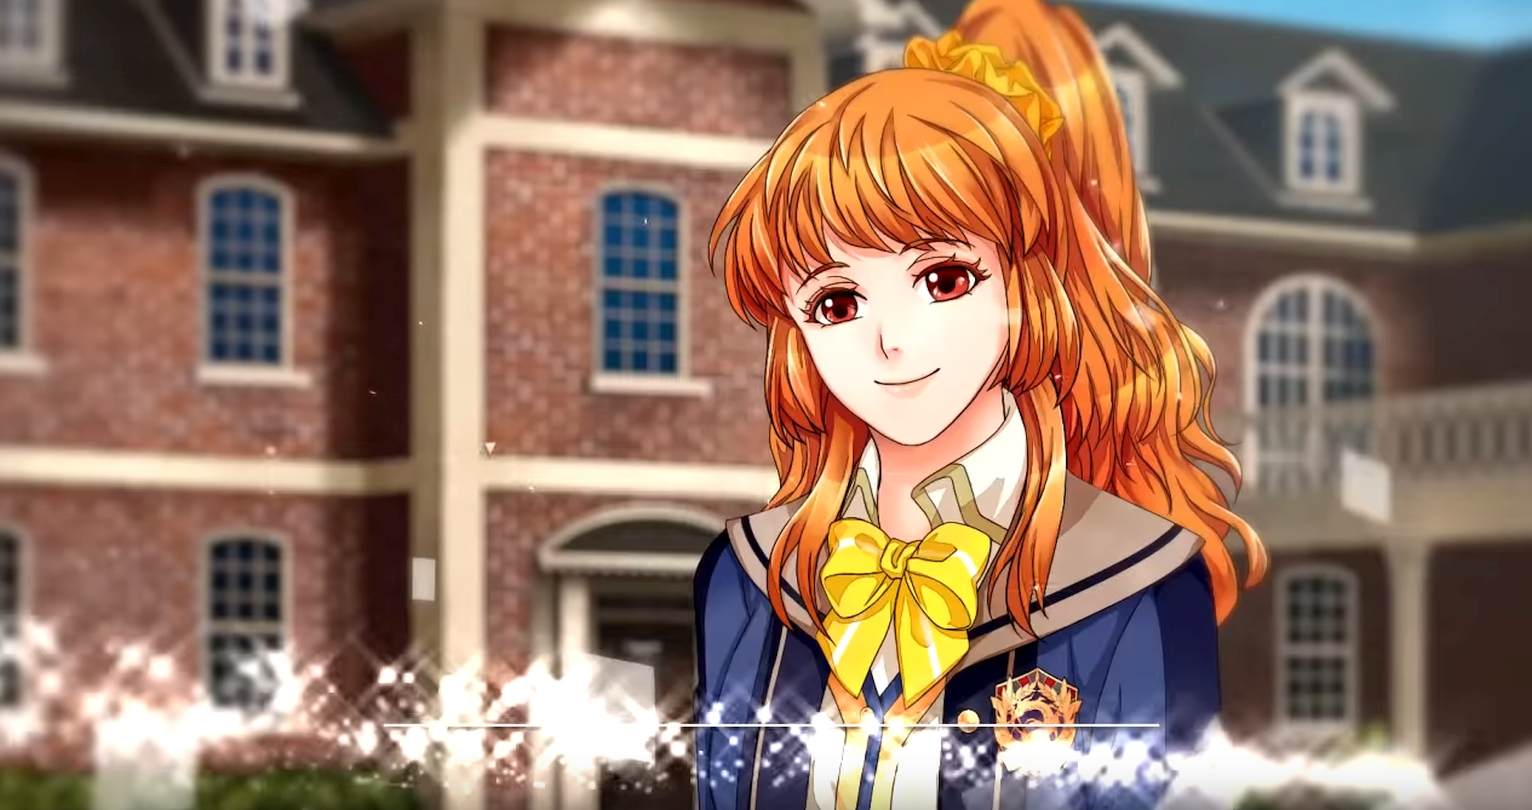 Visual Novel Developer Shall We Date? Removes Several Games Due To Revised Apple Policies